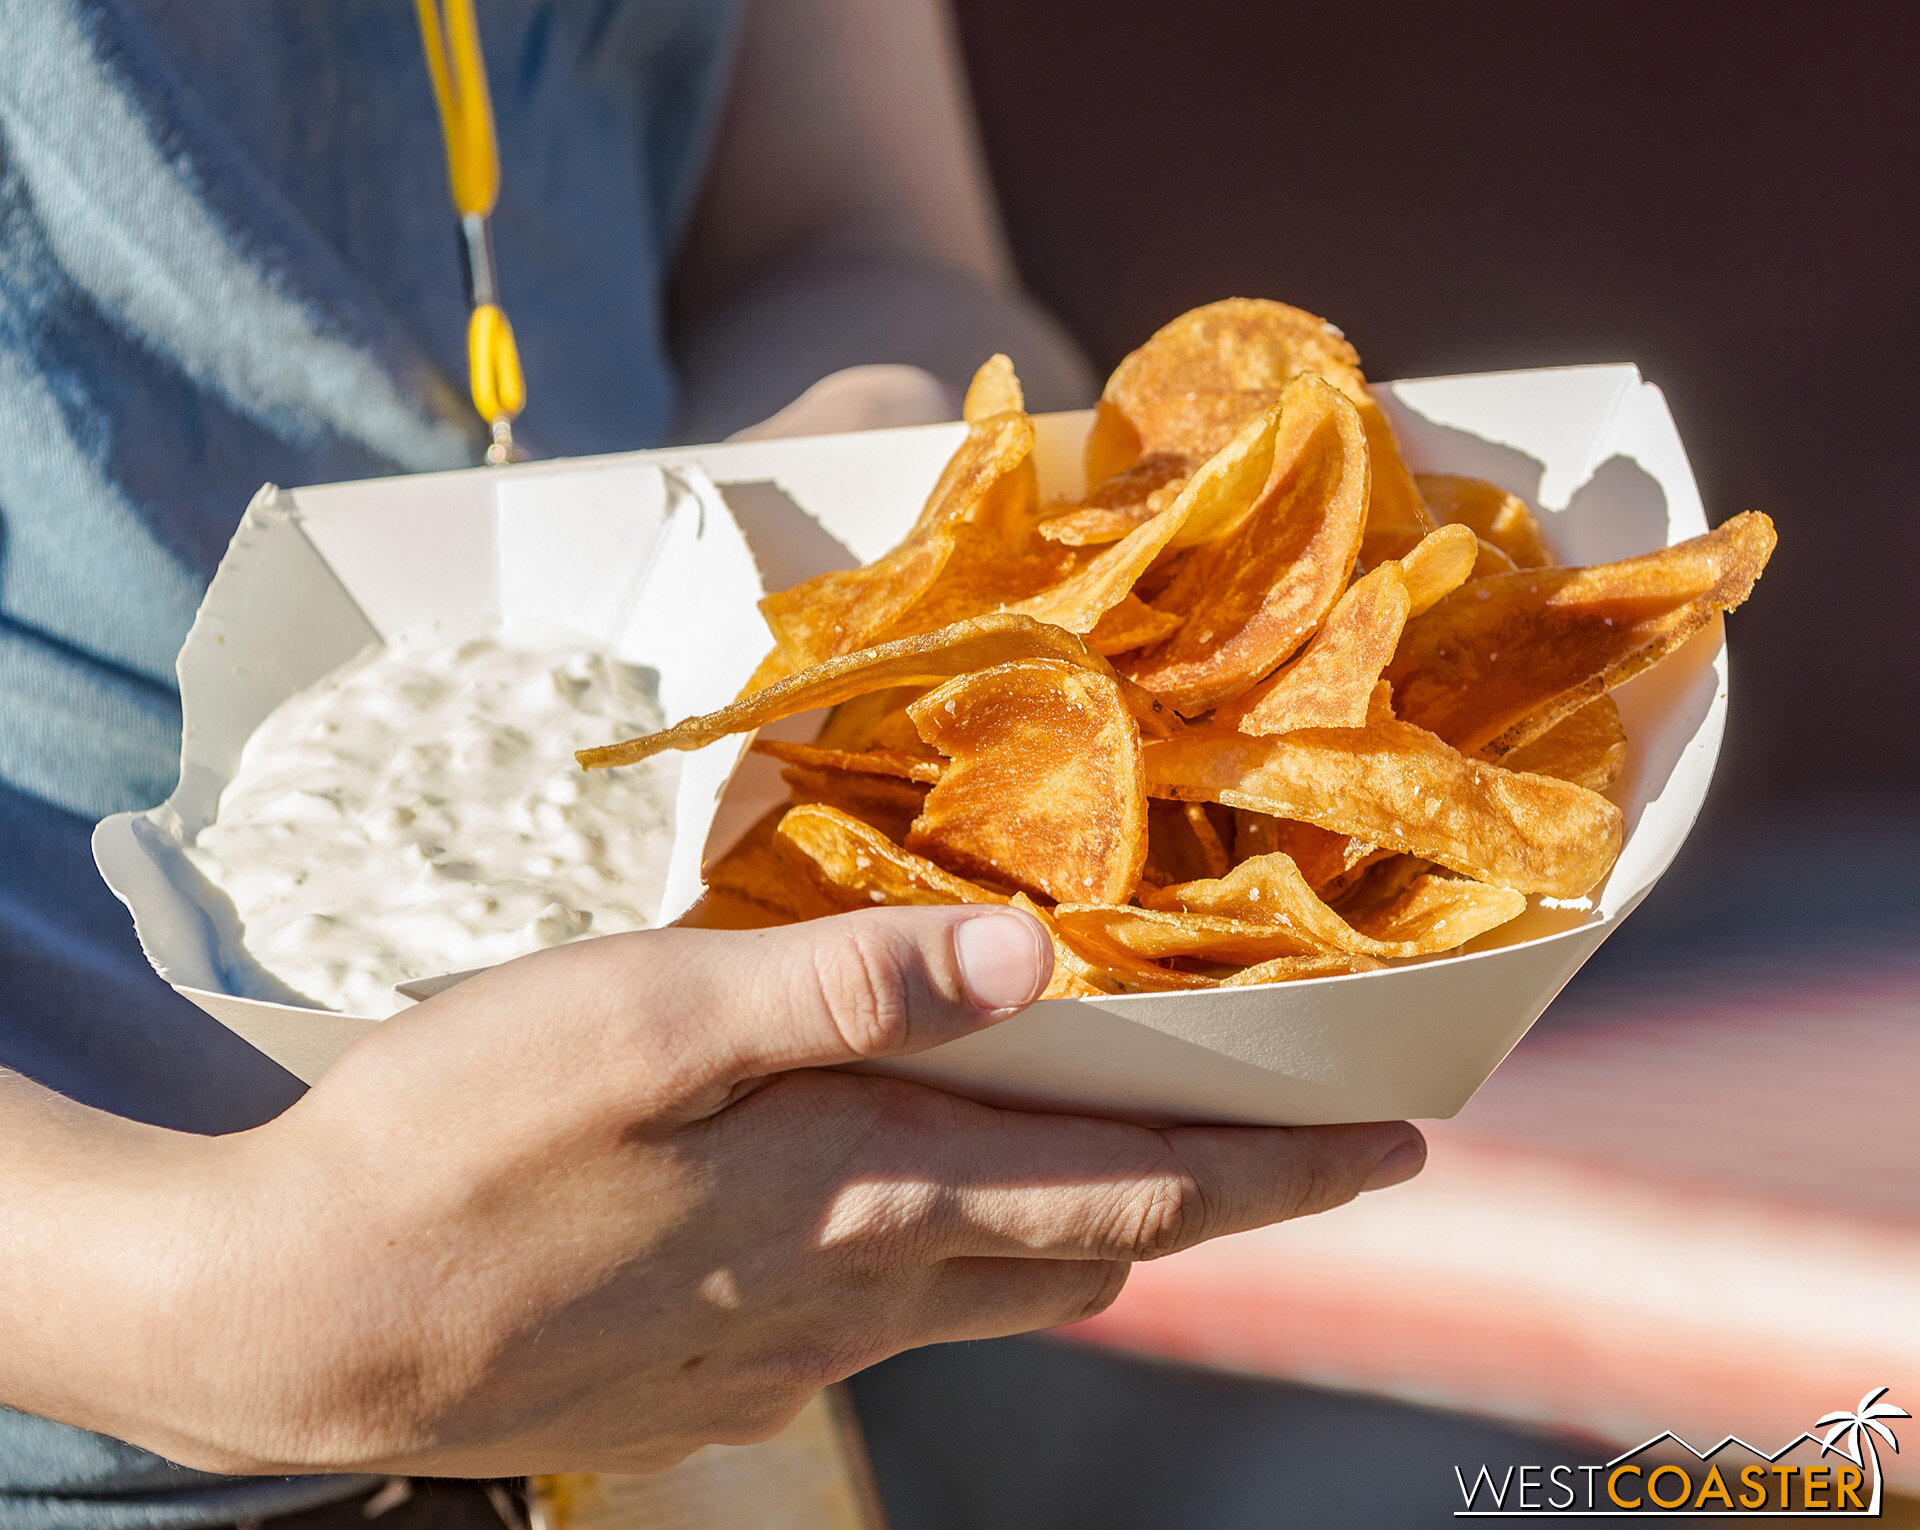  I didn’t try these, but I did see a lot of people getting the Deep Fried Potato Chips with an Onion Dip at Wilderness Broiler. 